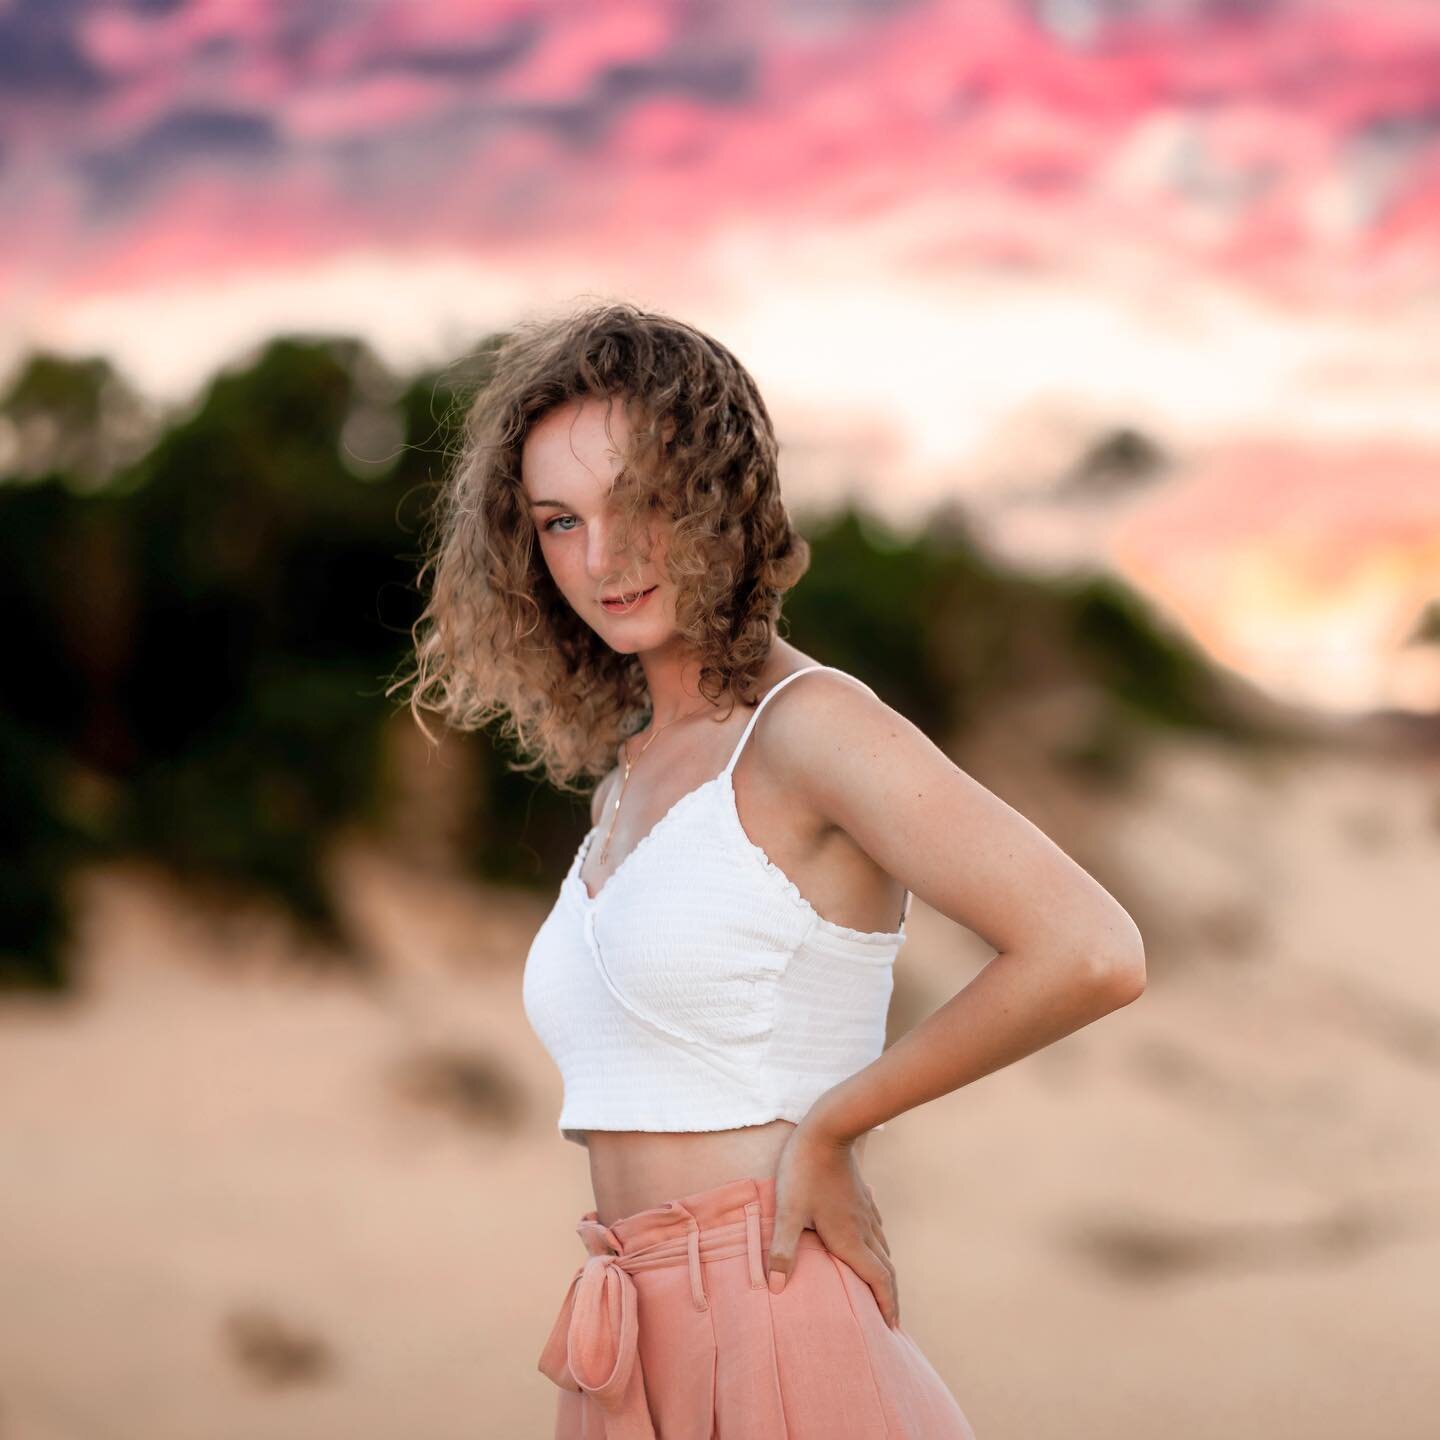 I&rsquo;m sharing another High School Senior photograph for all my OBX (The Outer Banks) lovers!  Is anyone familiar with Jockey&rsquo;s Ridge State Park in the Nags Head region of OBX?  It is UNREAL beautiful there, and I had the most incredible pho